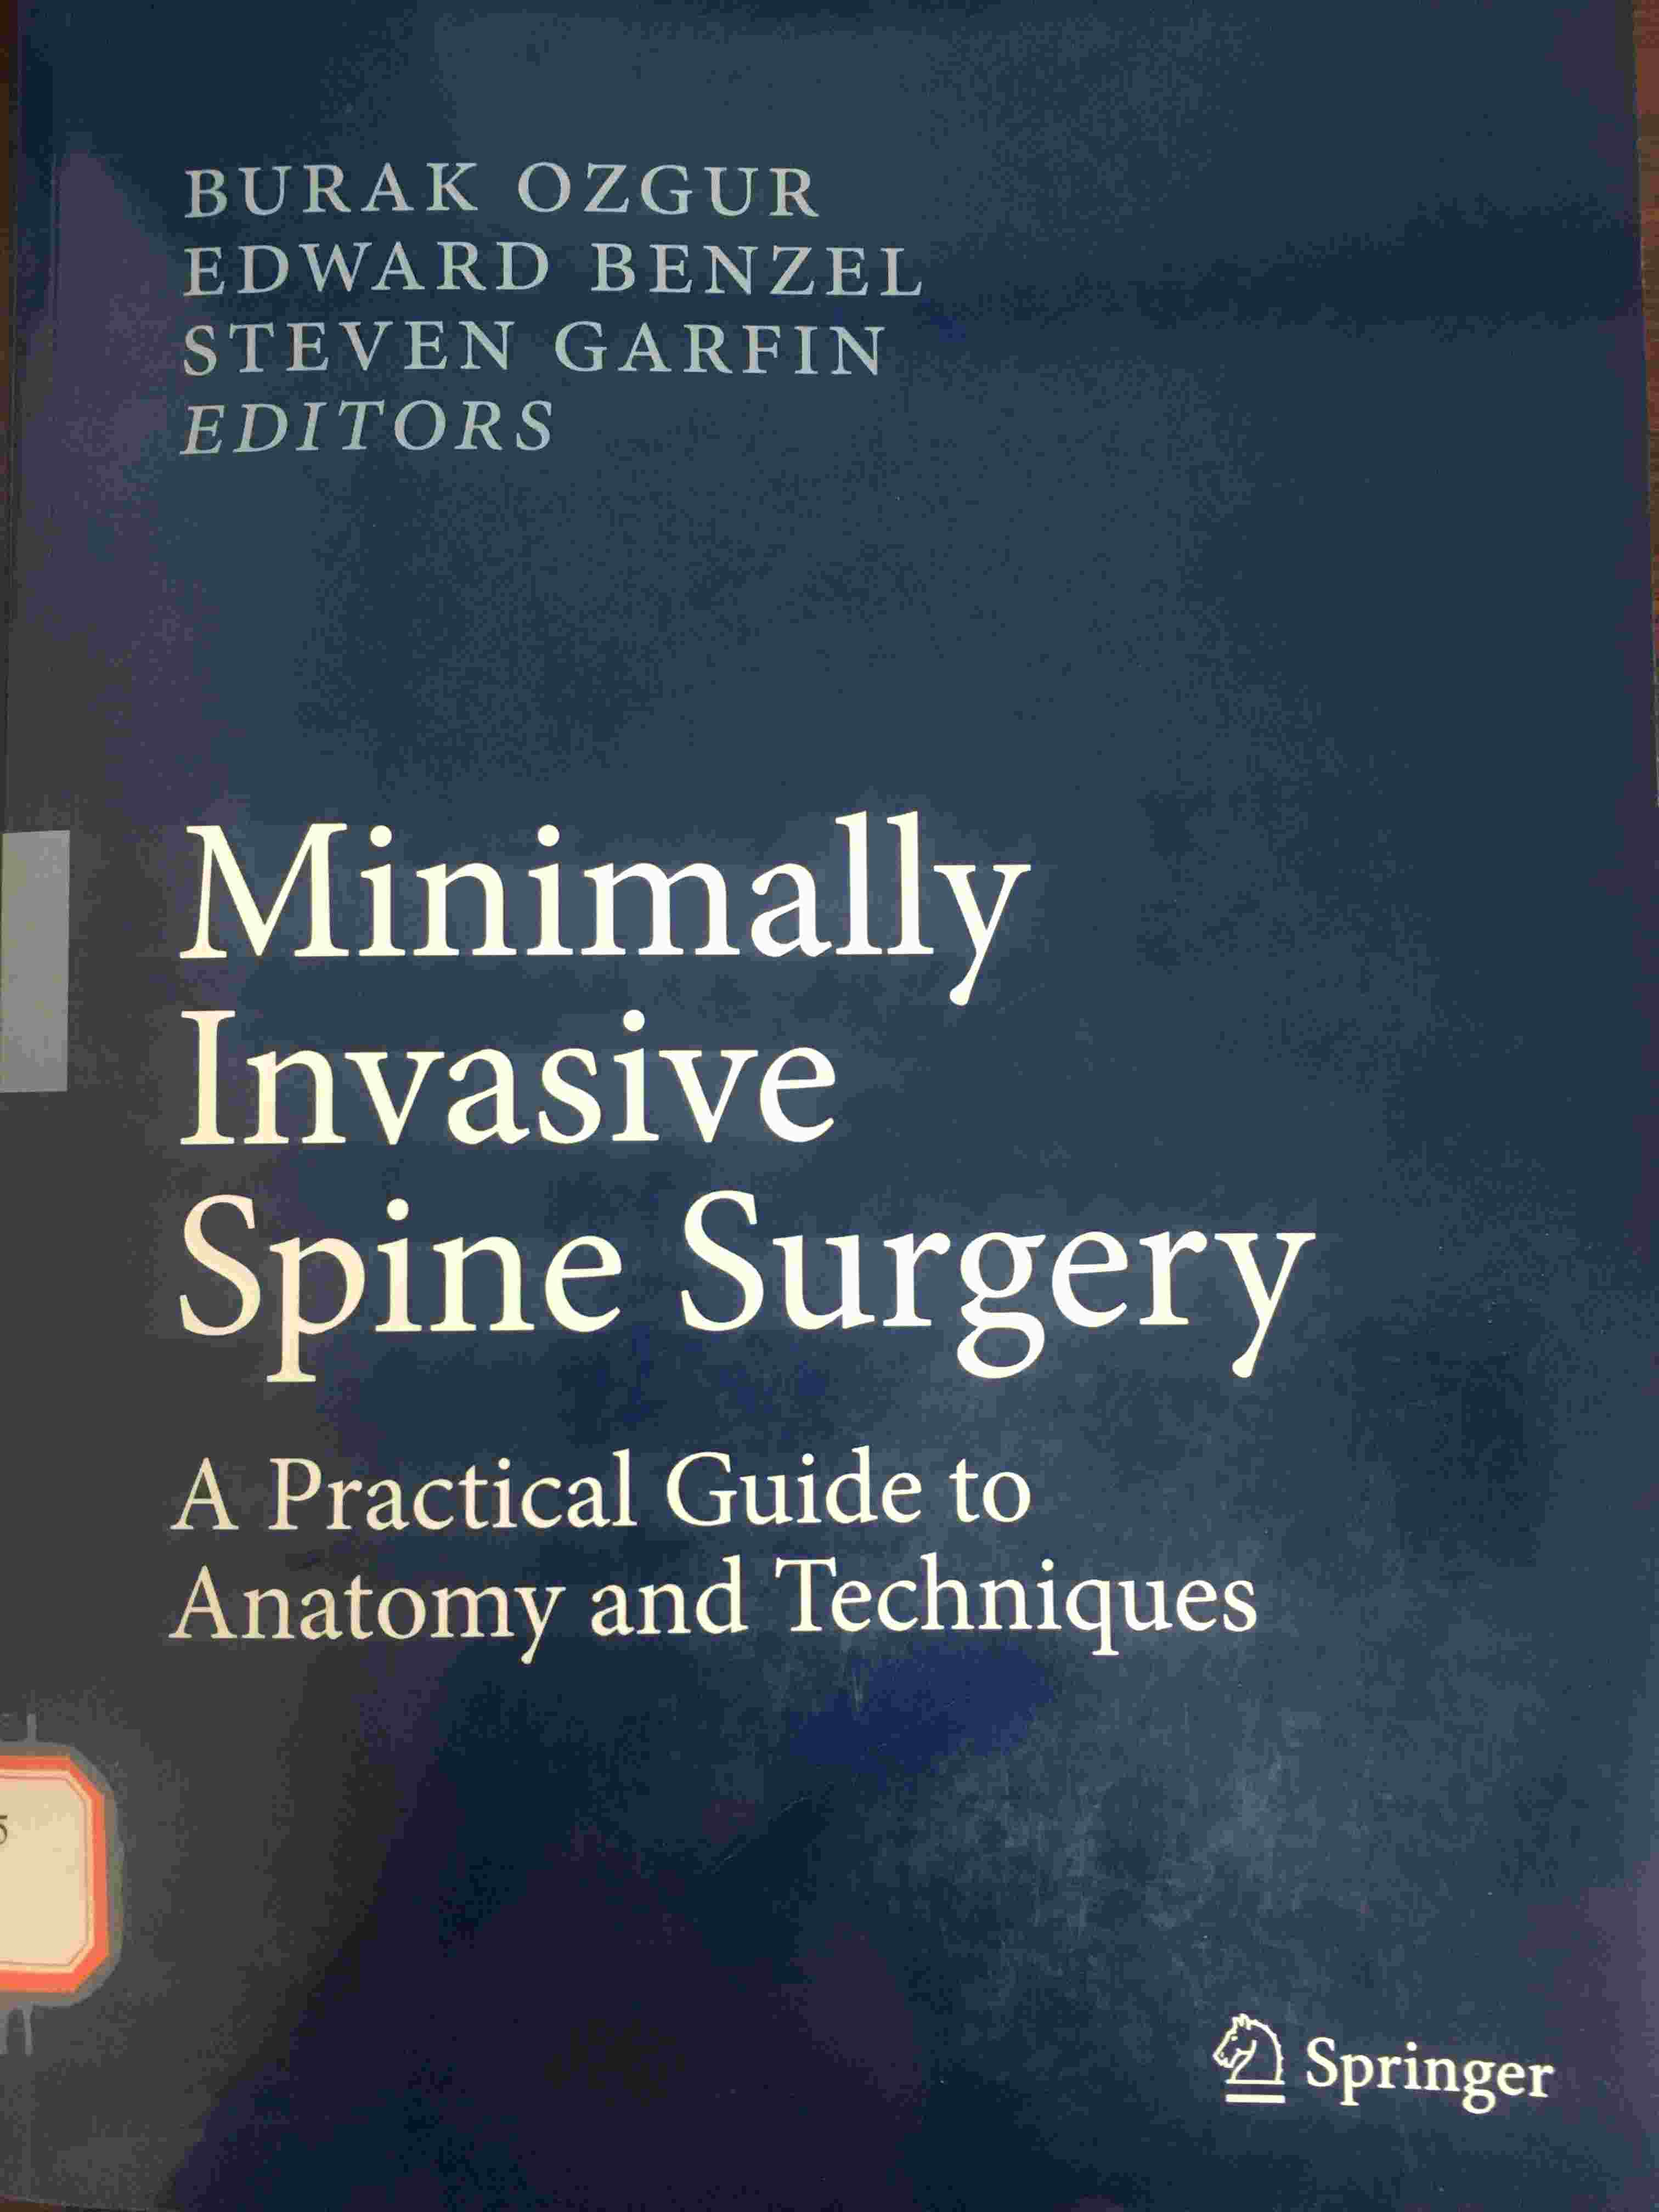 «Minimally Invasive Spine Surgery: A Practical Guide to Anatomy and Techniques»